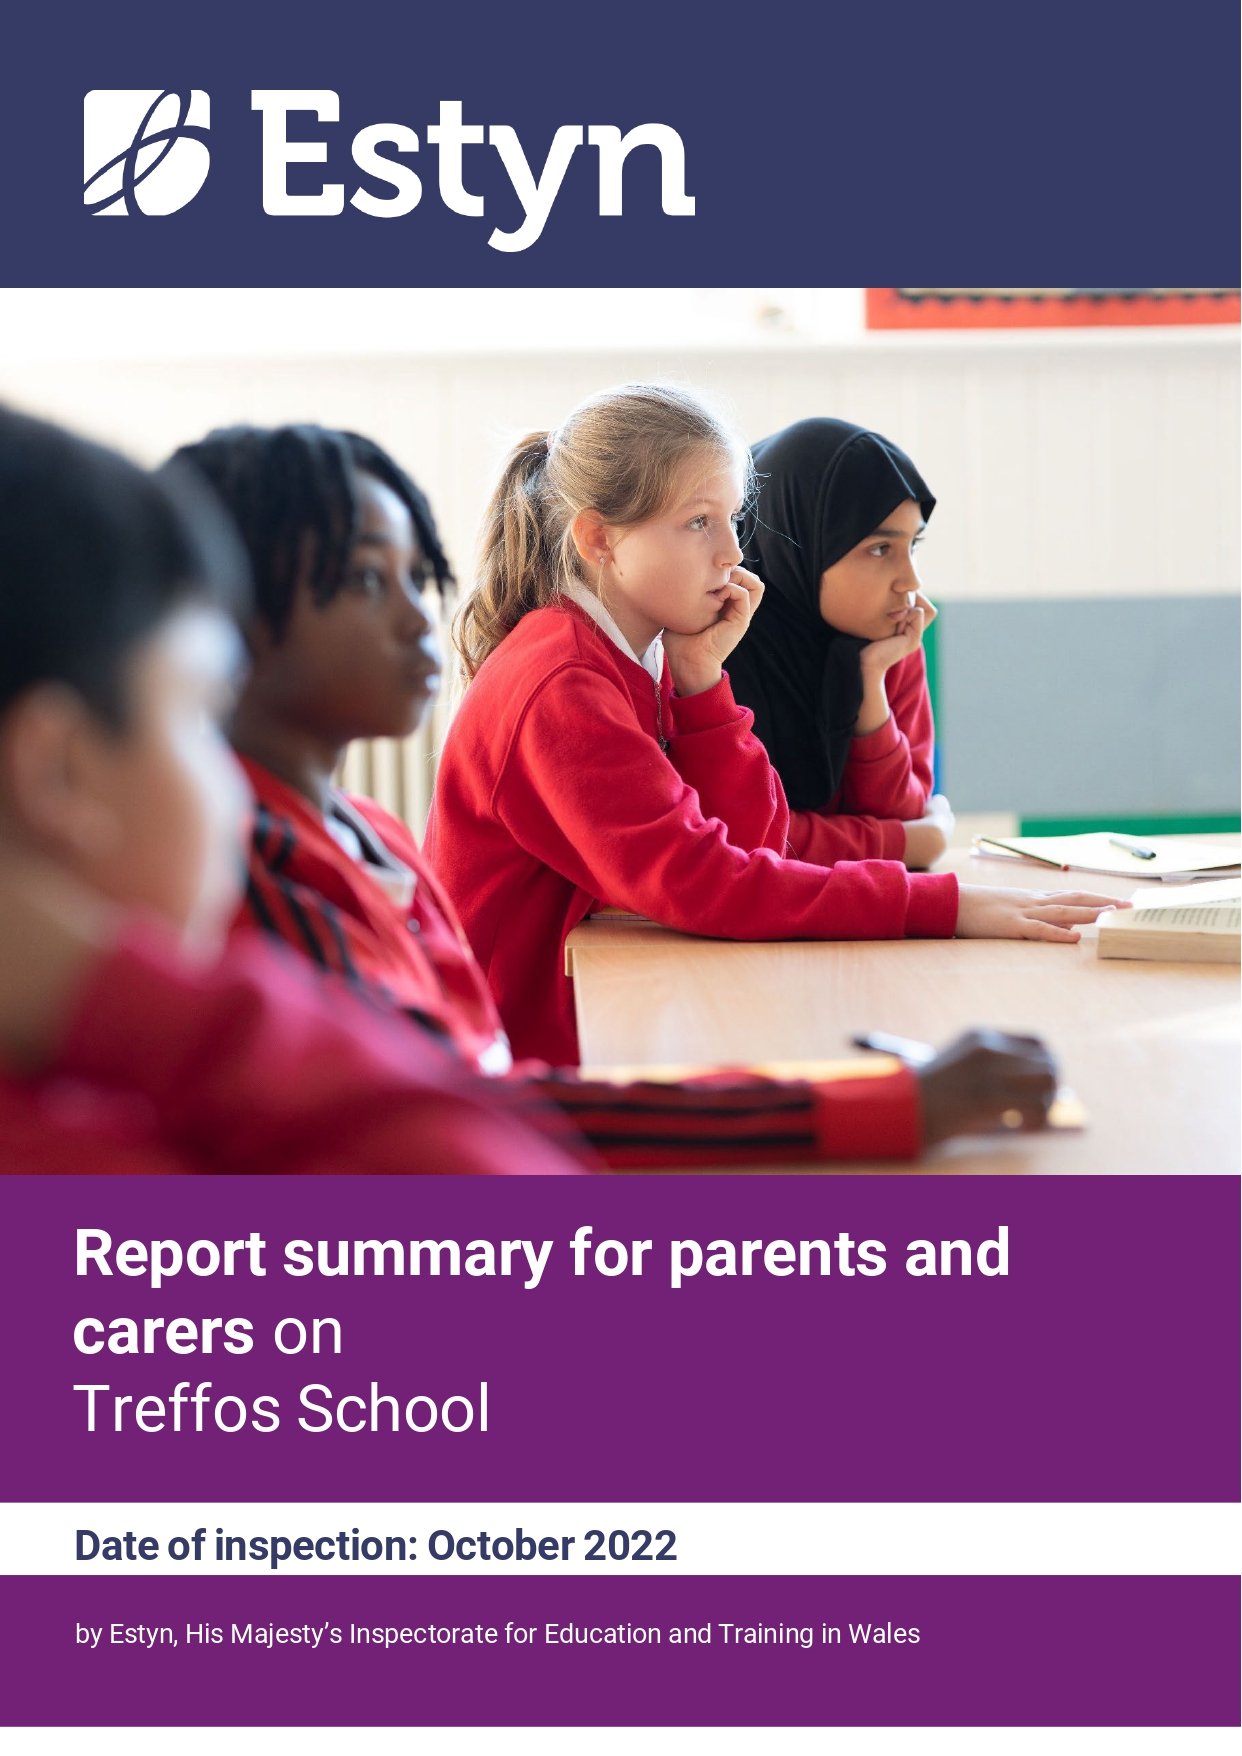 Parents and carers - Inspection Report - Treffos School 2022_page-0001.jpg